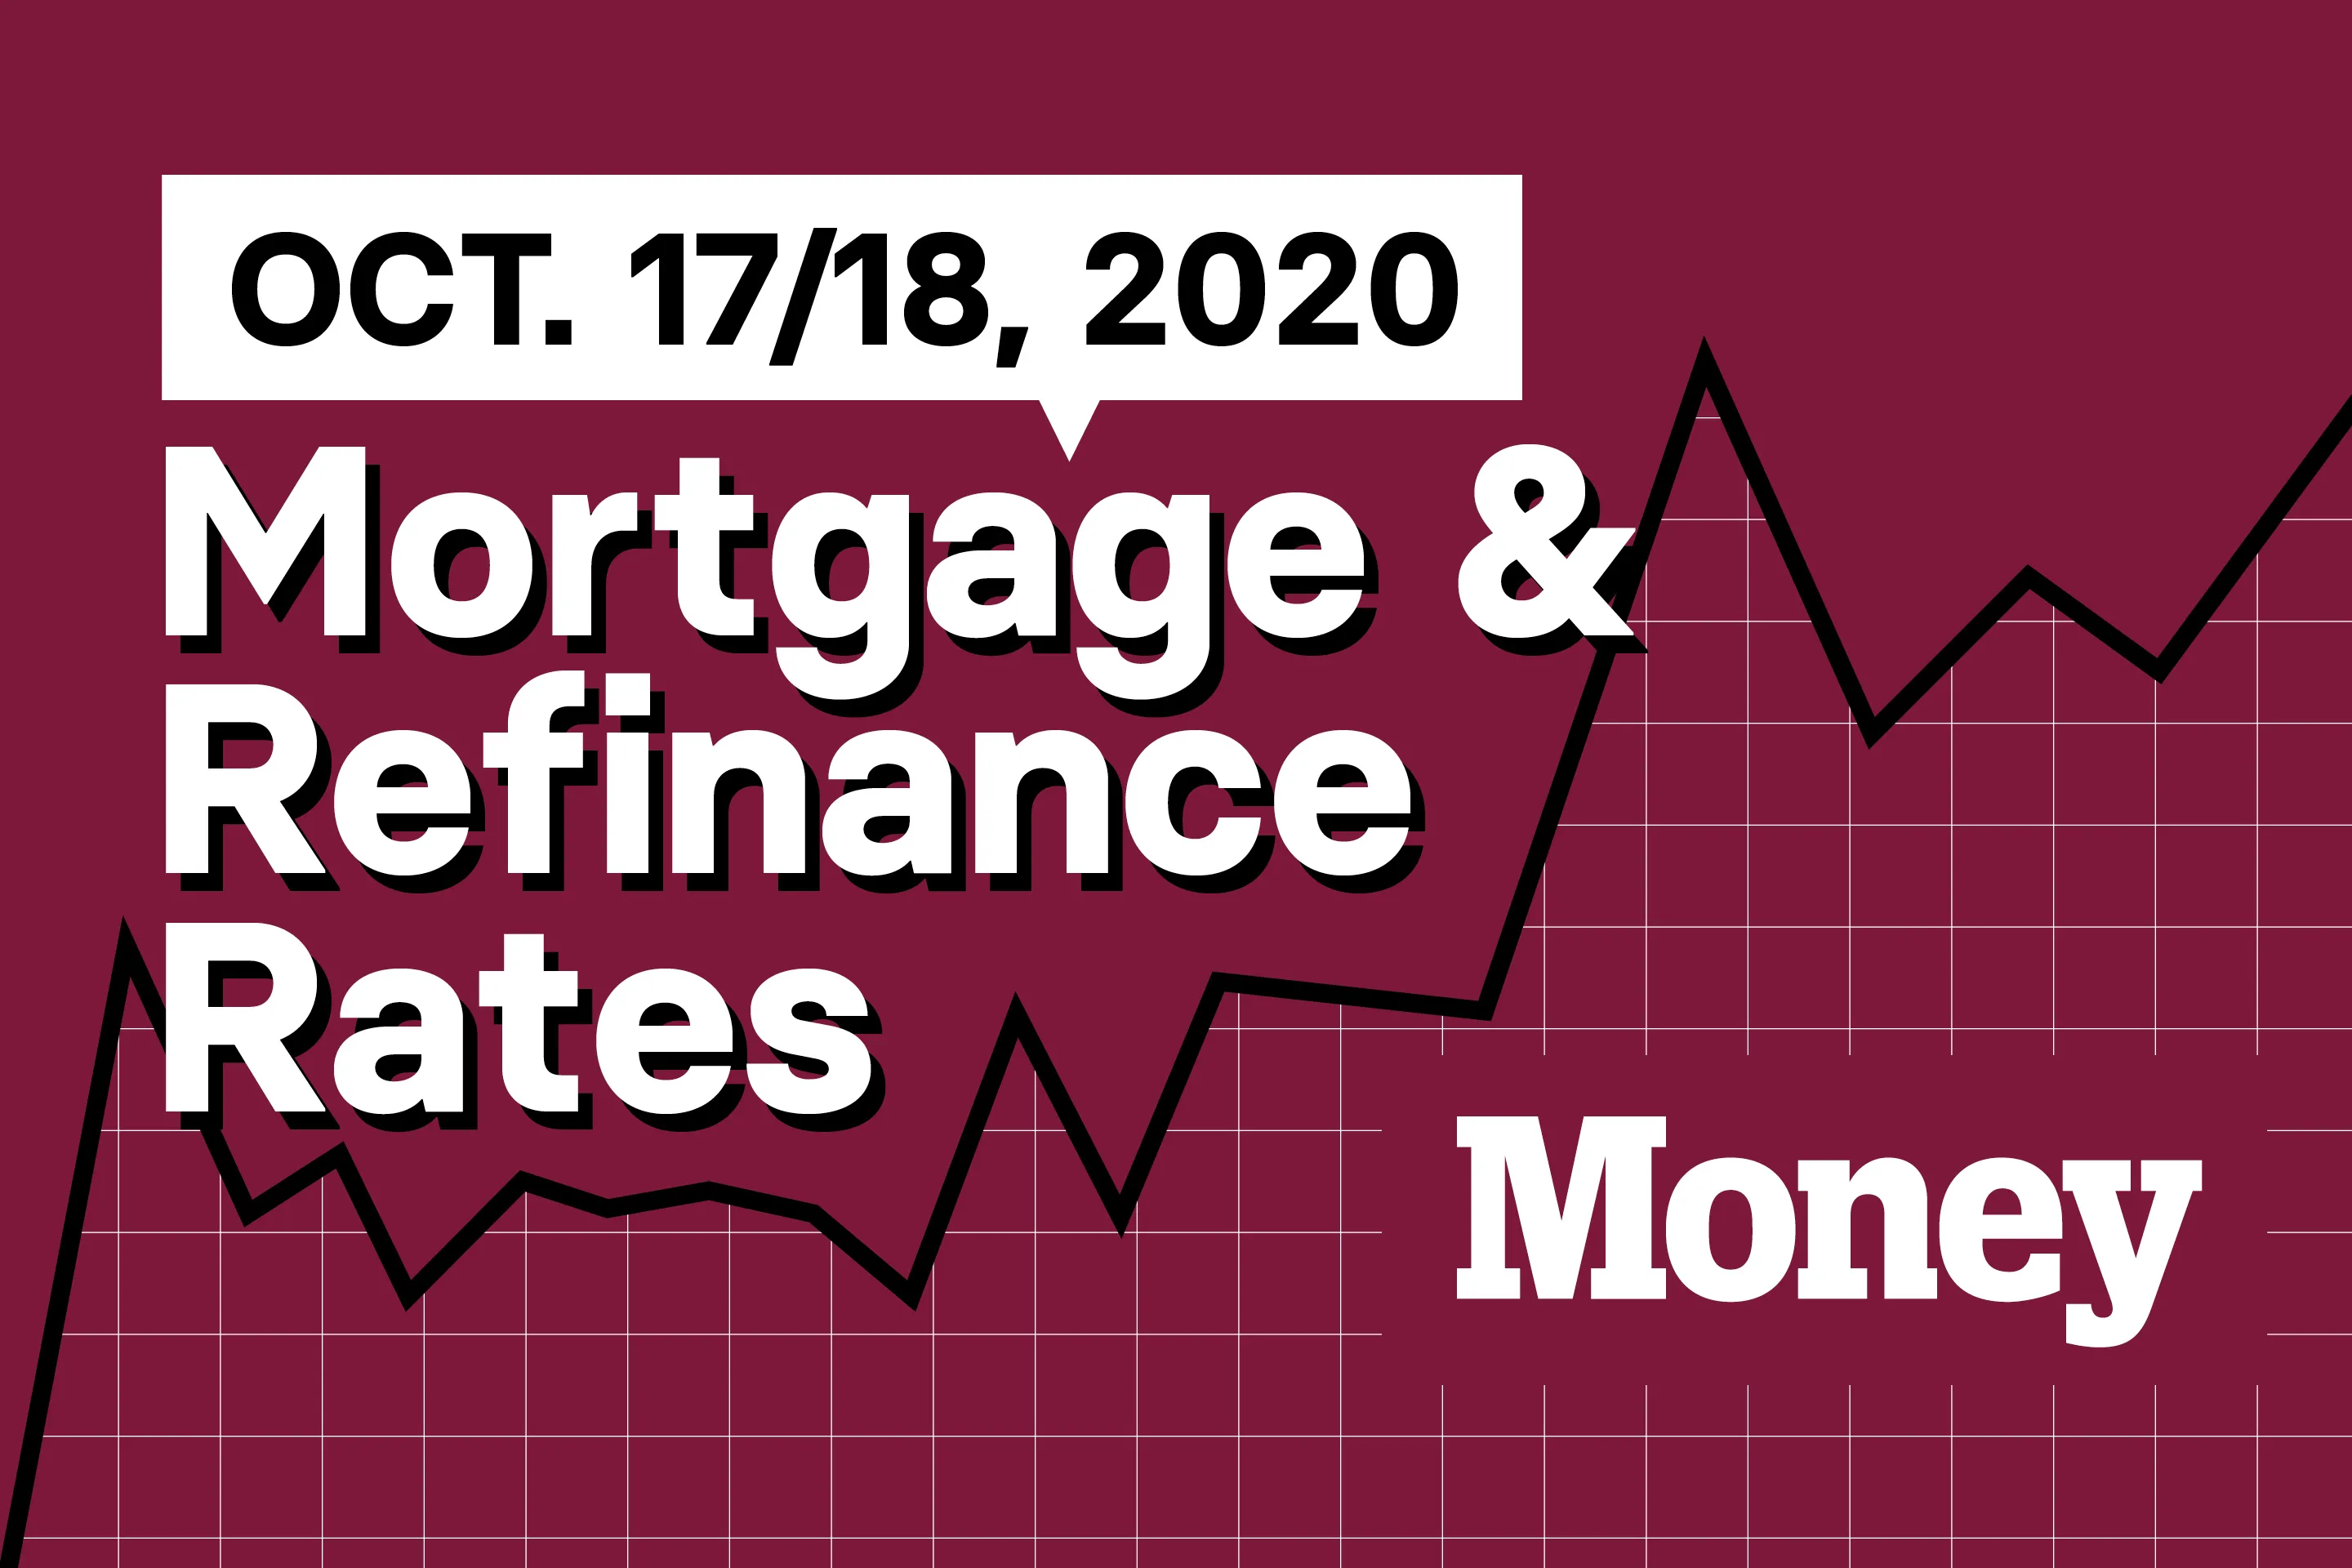 Today's Mortgage and Refinance Rates for October 17 and 18